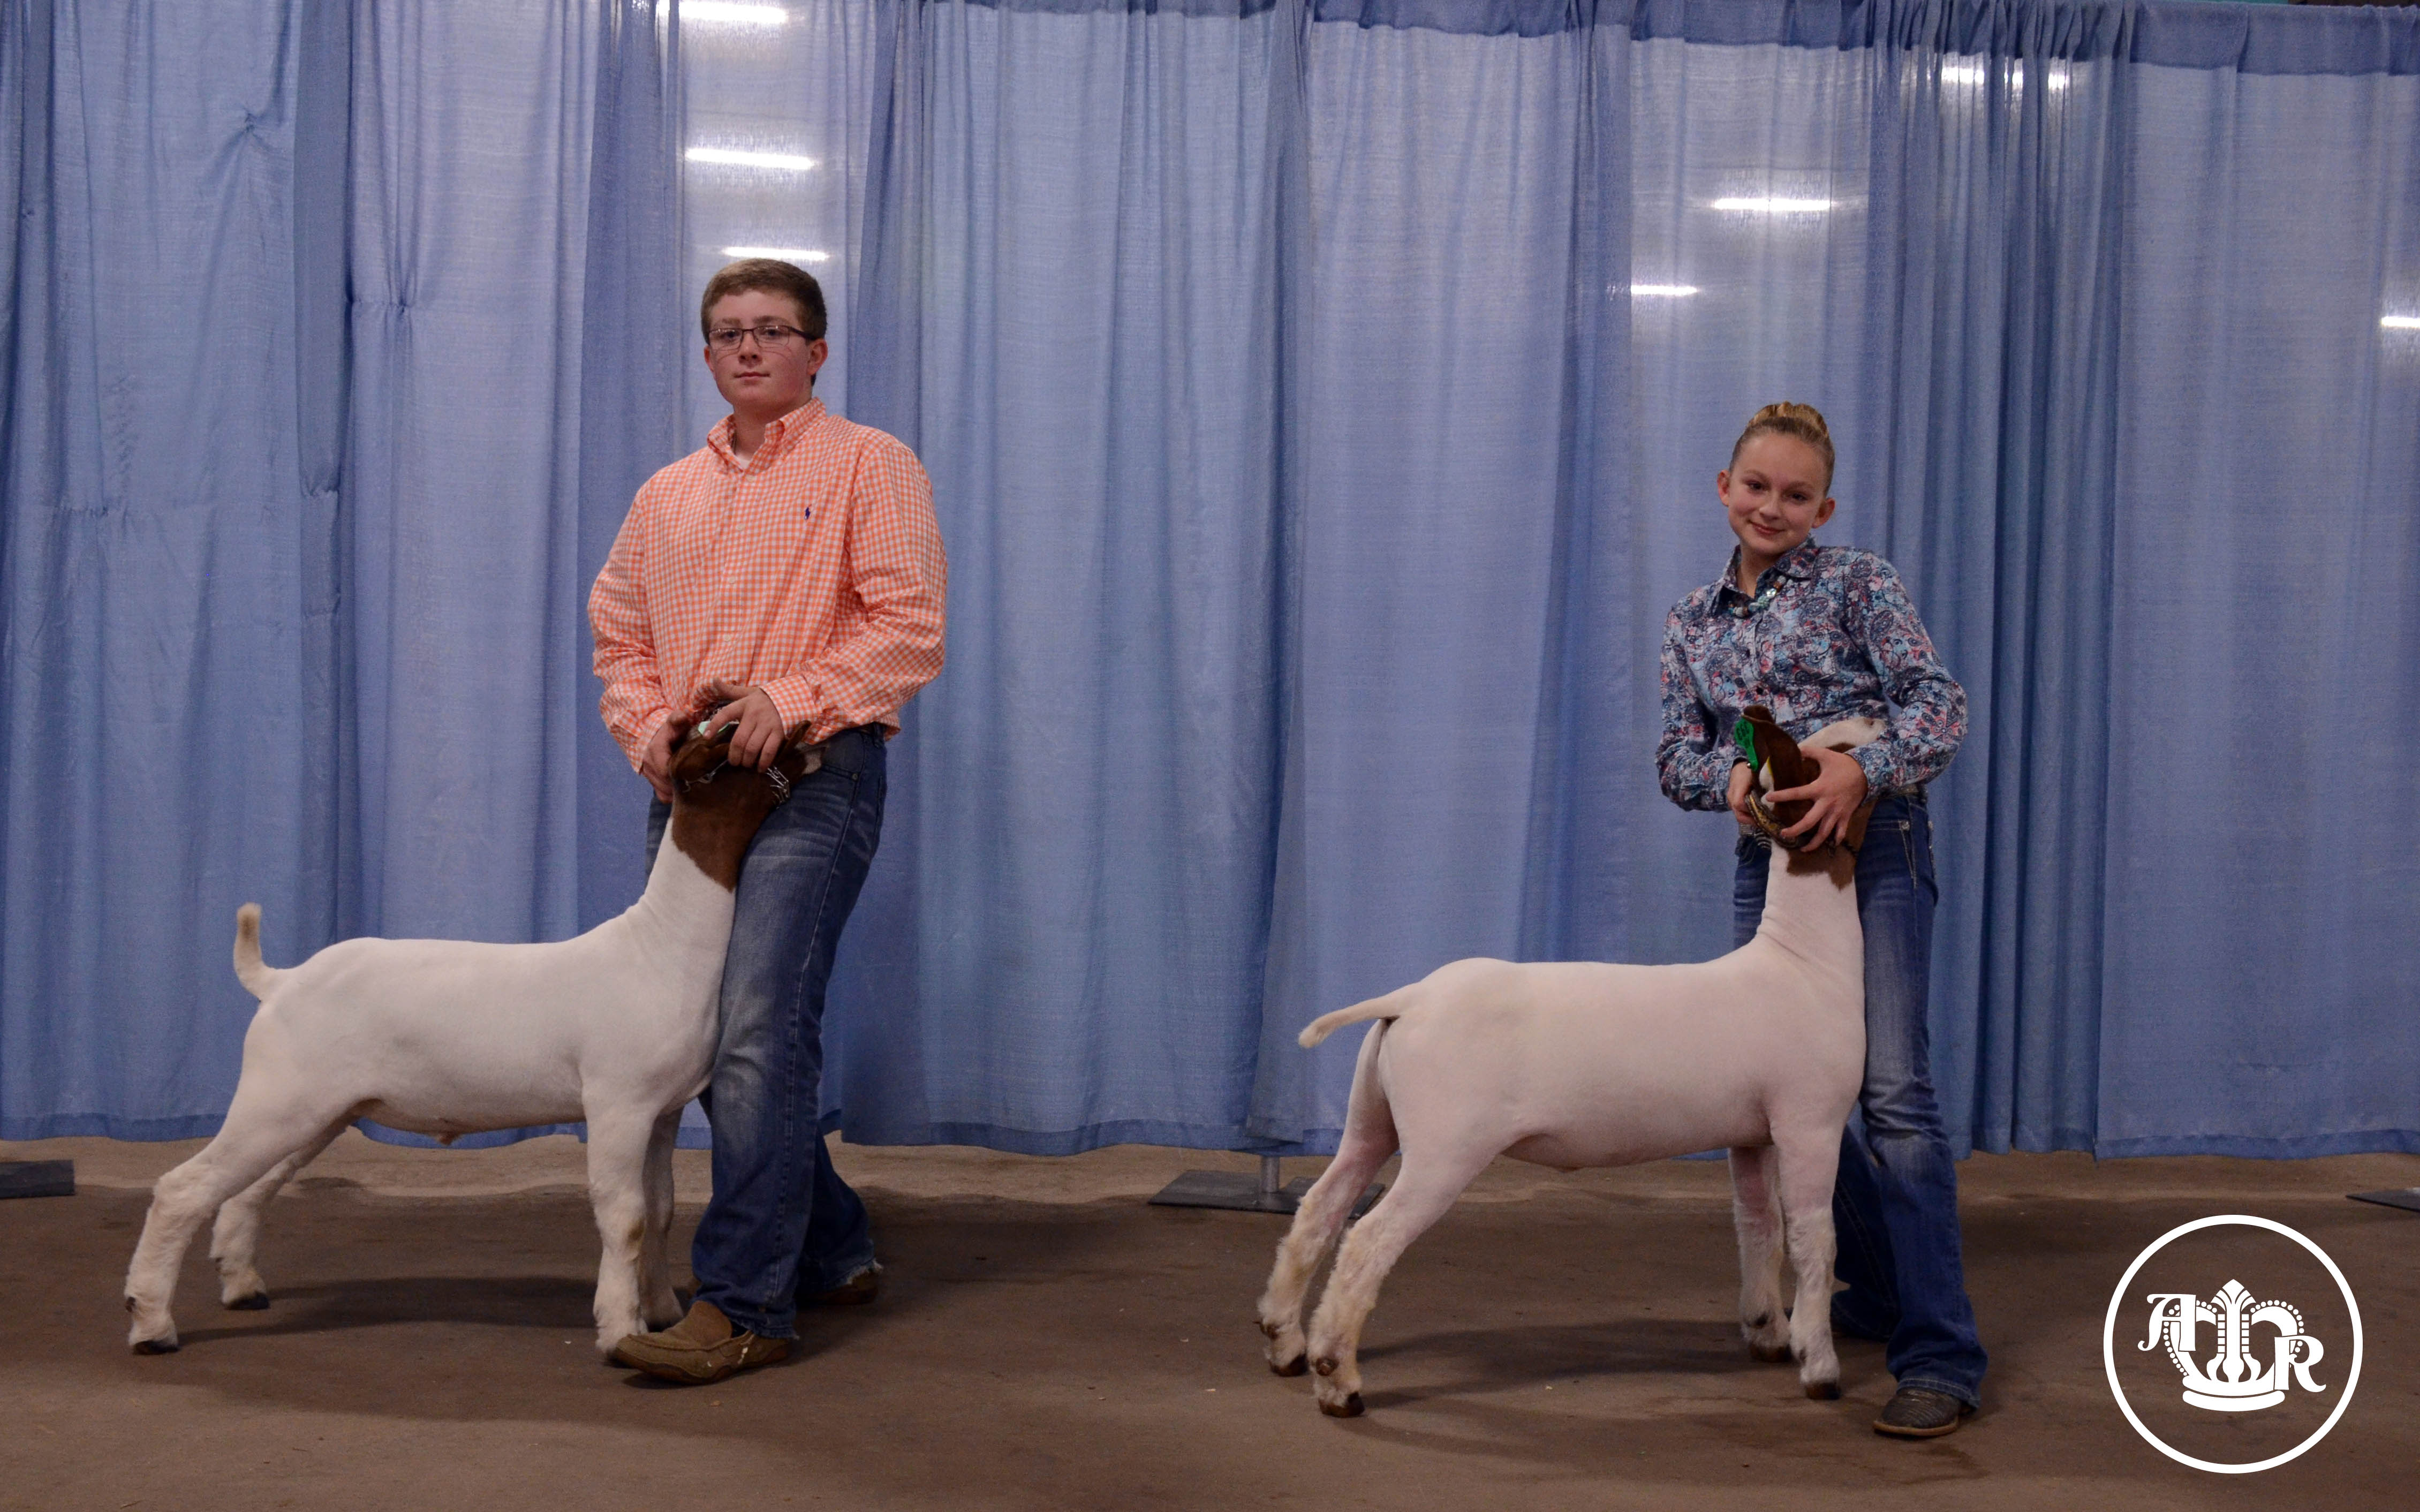 Smith and Pence Named Top Junior Market Goat Showmanship Exhibitors